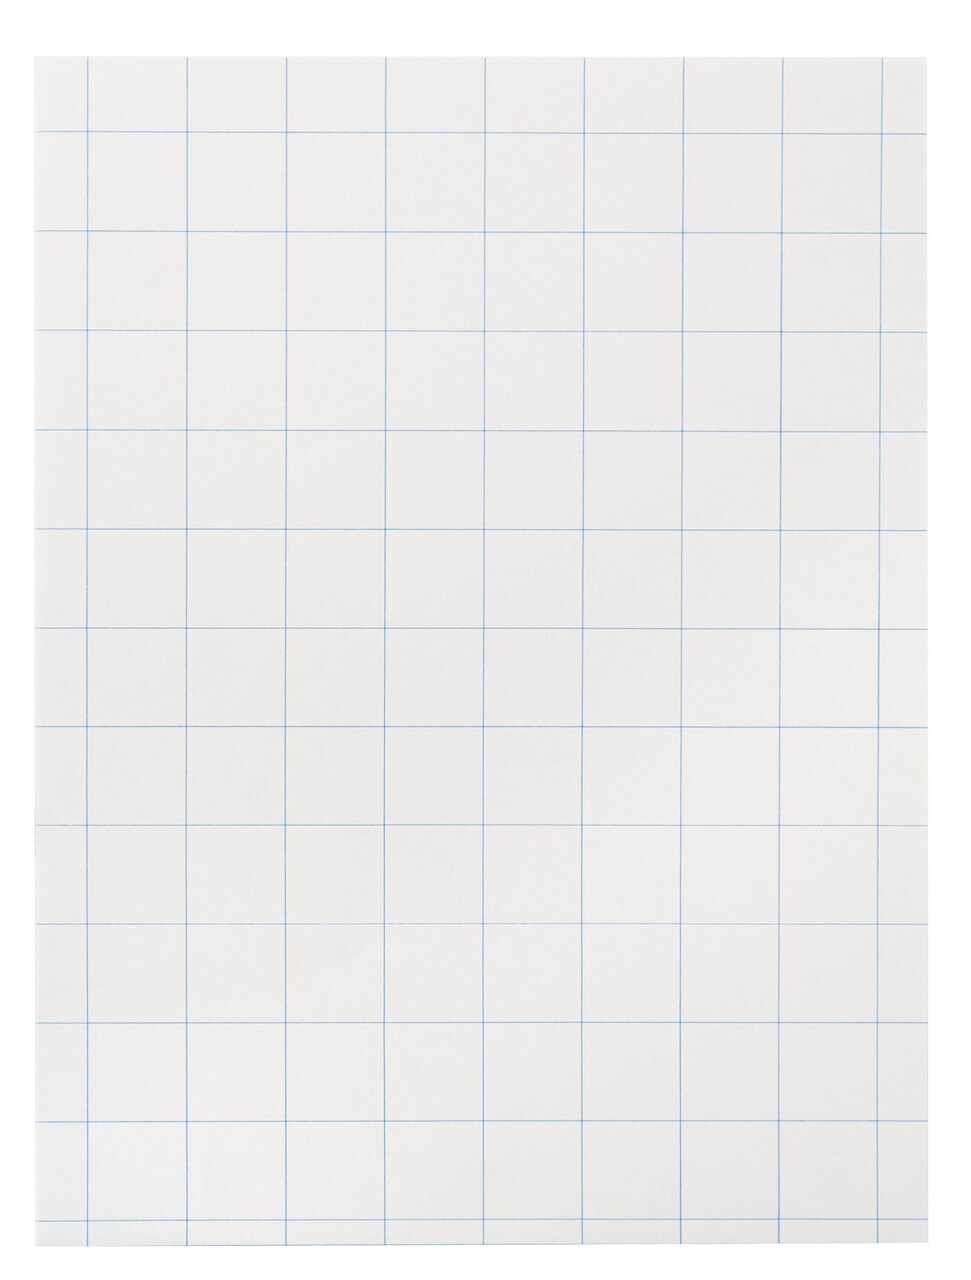 School Smart Graph Paper, 1 Inch Rule, 9 x 12 Inches, White, 500 Sheets